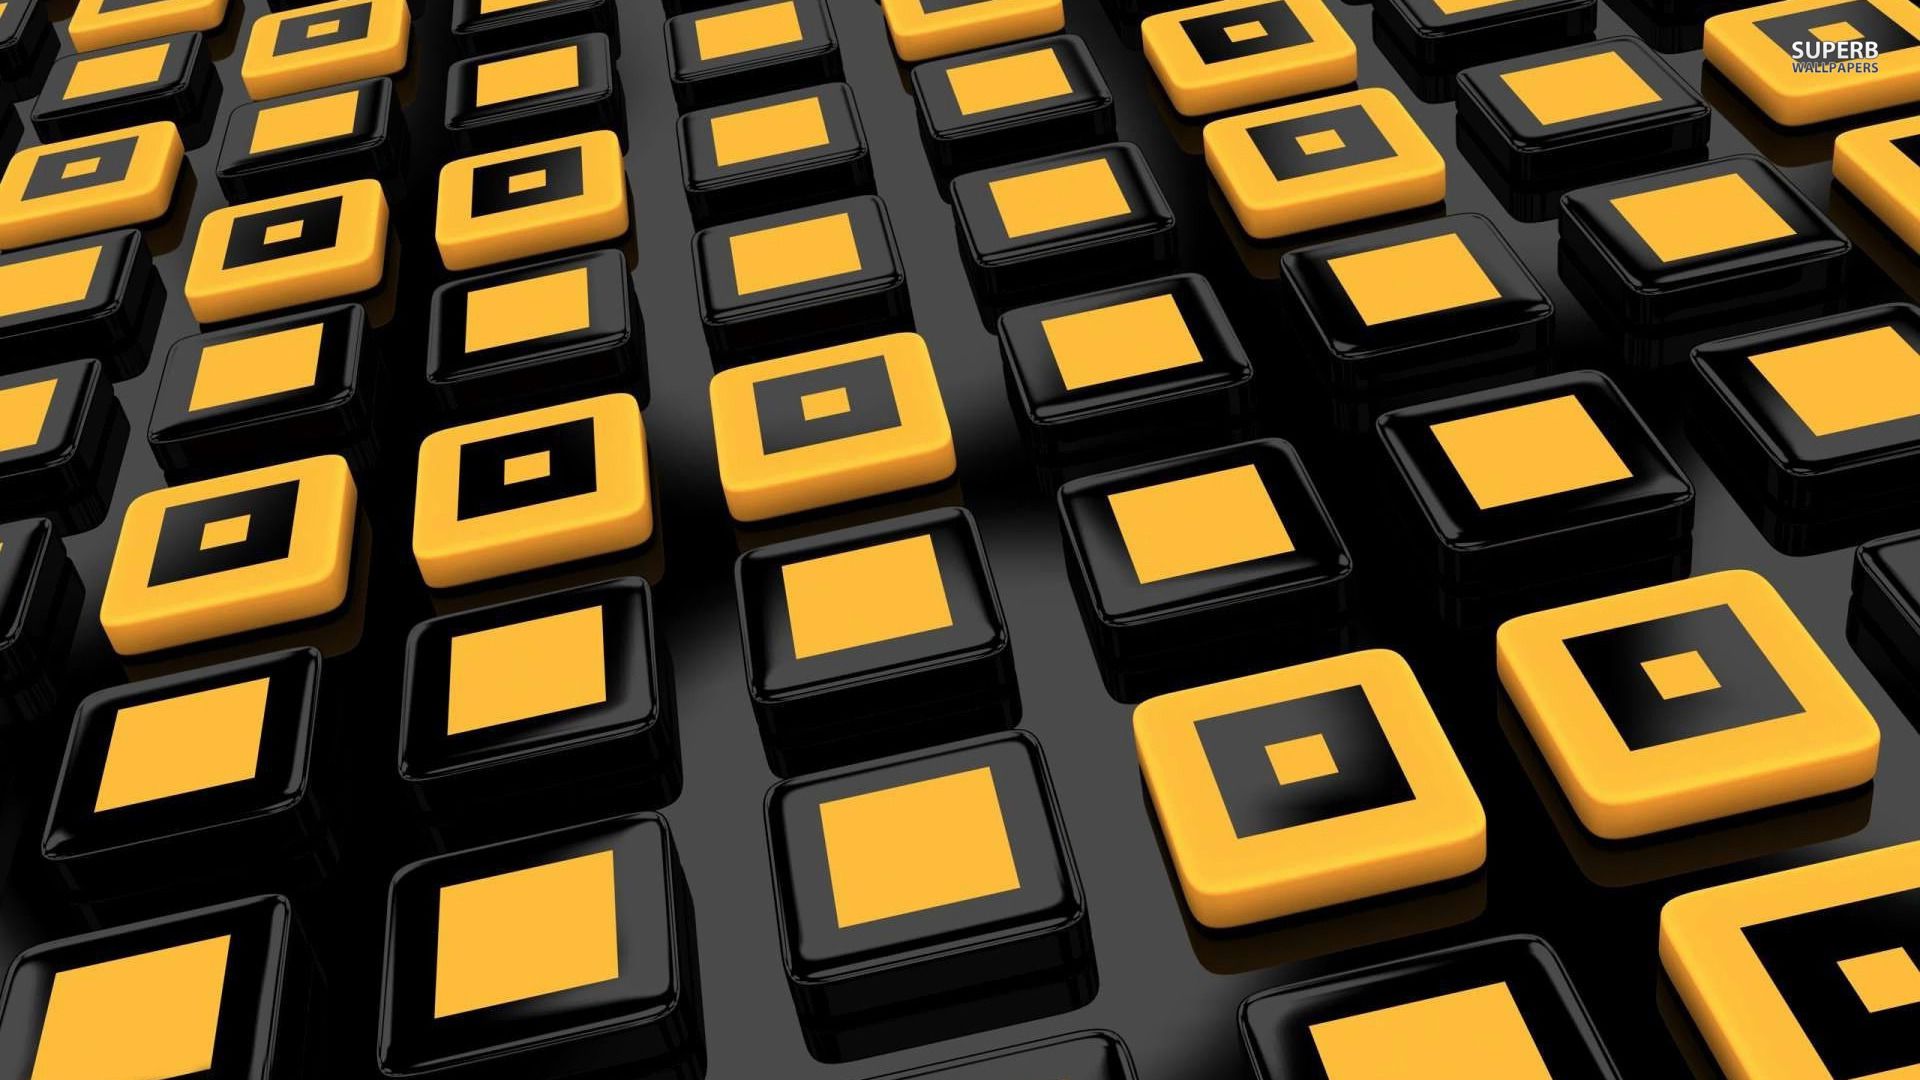 Black and yellow buttons wallpaper - 3D wallpapers